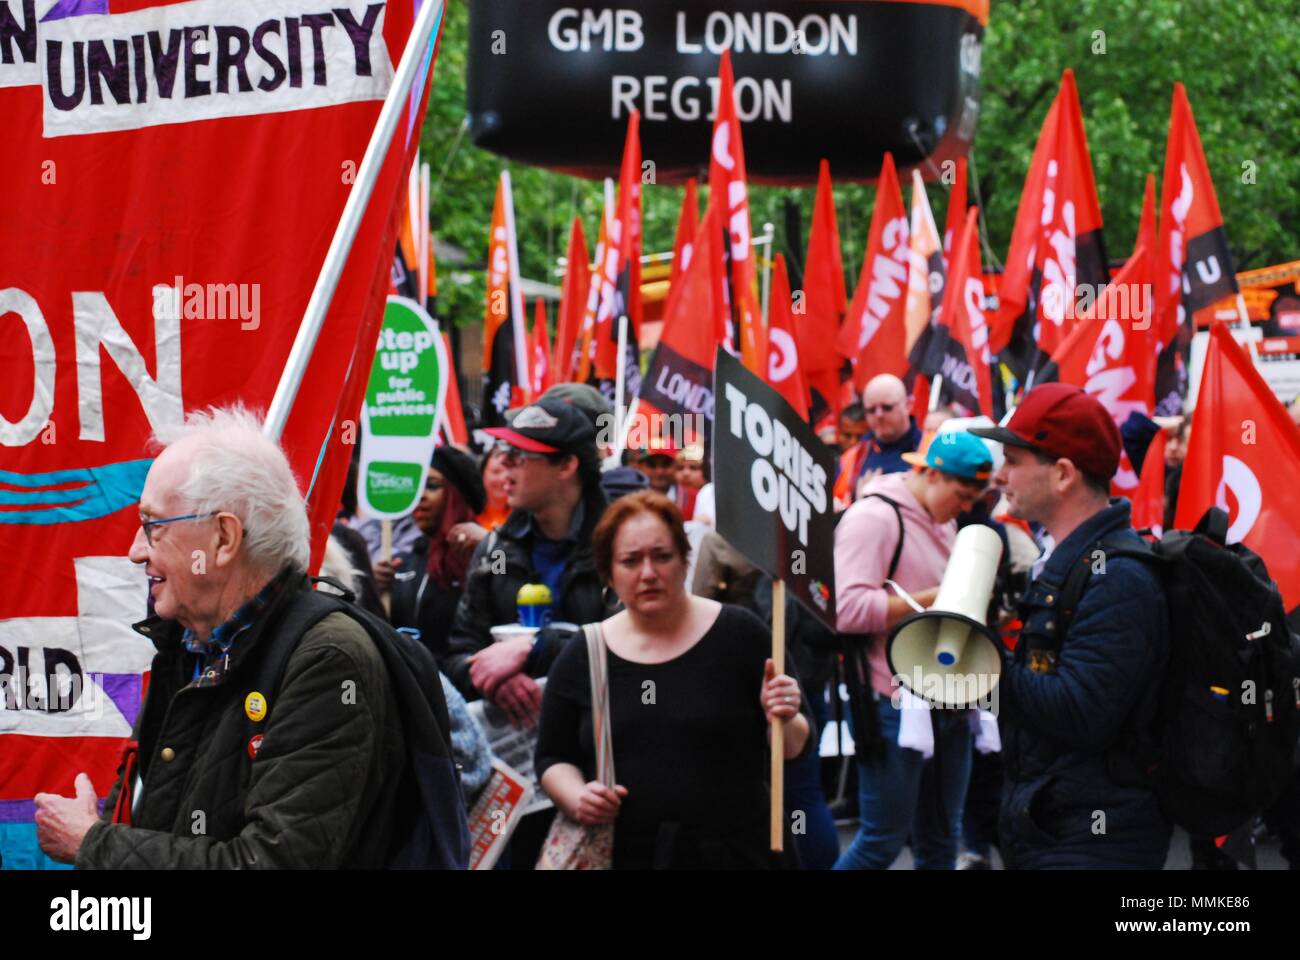 London, UK. 12th May 2018.   saturday emabnkment London uk . trade union march for end to the low pay , many public sector workers pay has been frozen for over 8 yrs wages are below inflation in the uk The present consevatives are not tackling this issue  sensibly leading to a low standards of public service in many sectors. thousands braved the rain to make the message clear ,austerity is not the working ,before rally at hyde park . Credit: Philip Robins/Alamy Live News Stock Photo